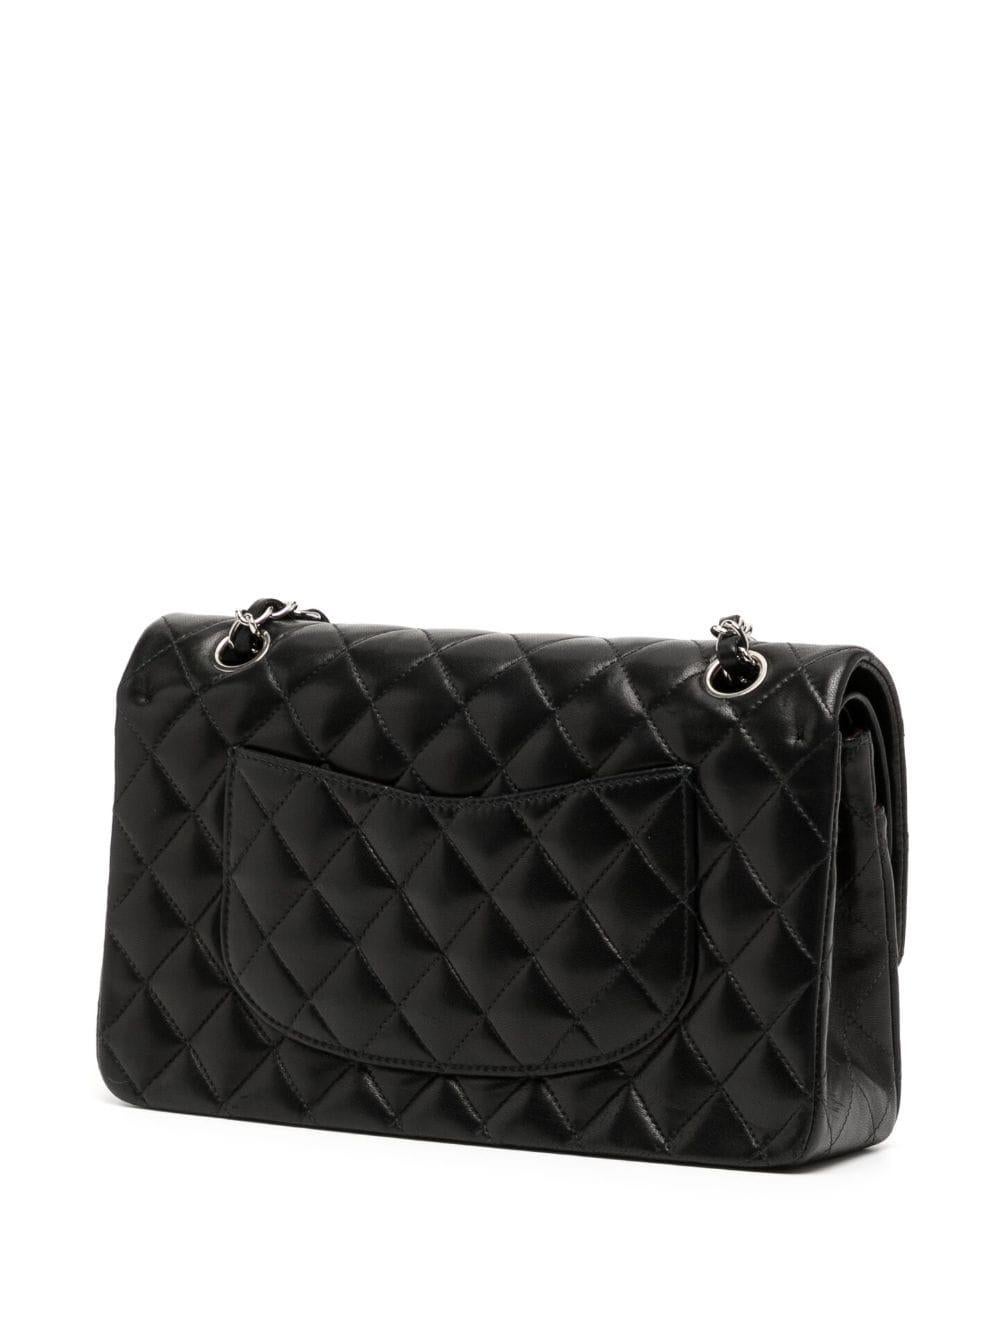 Chanel 2006 Vintage 2.55 Quilted Lambskin Medium Classic Double Flap Bag  For Sale 2